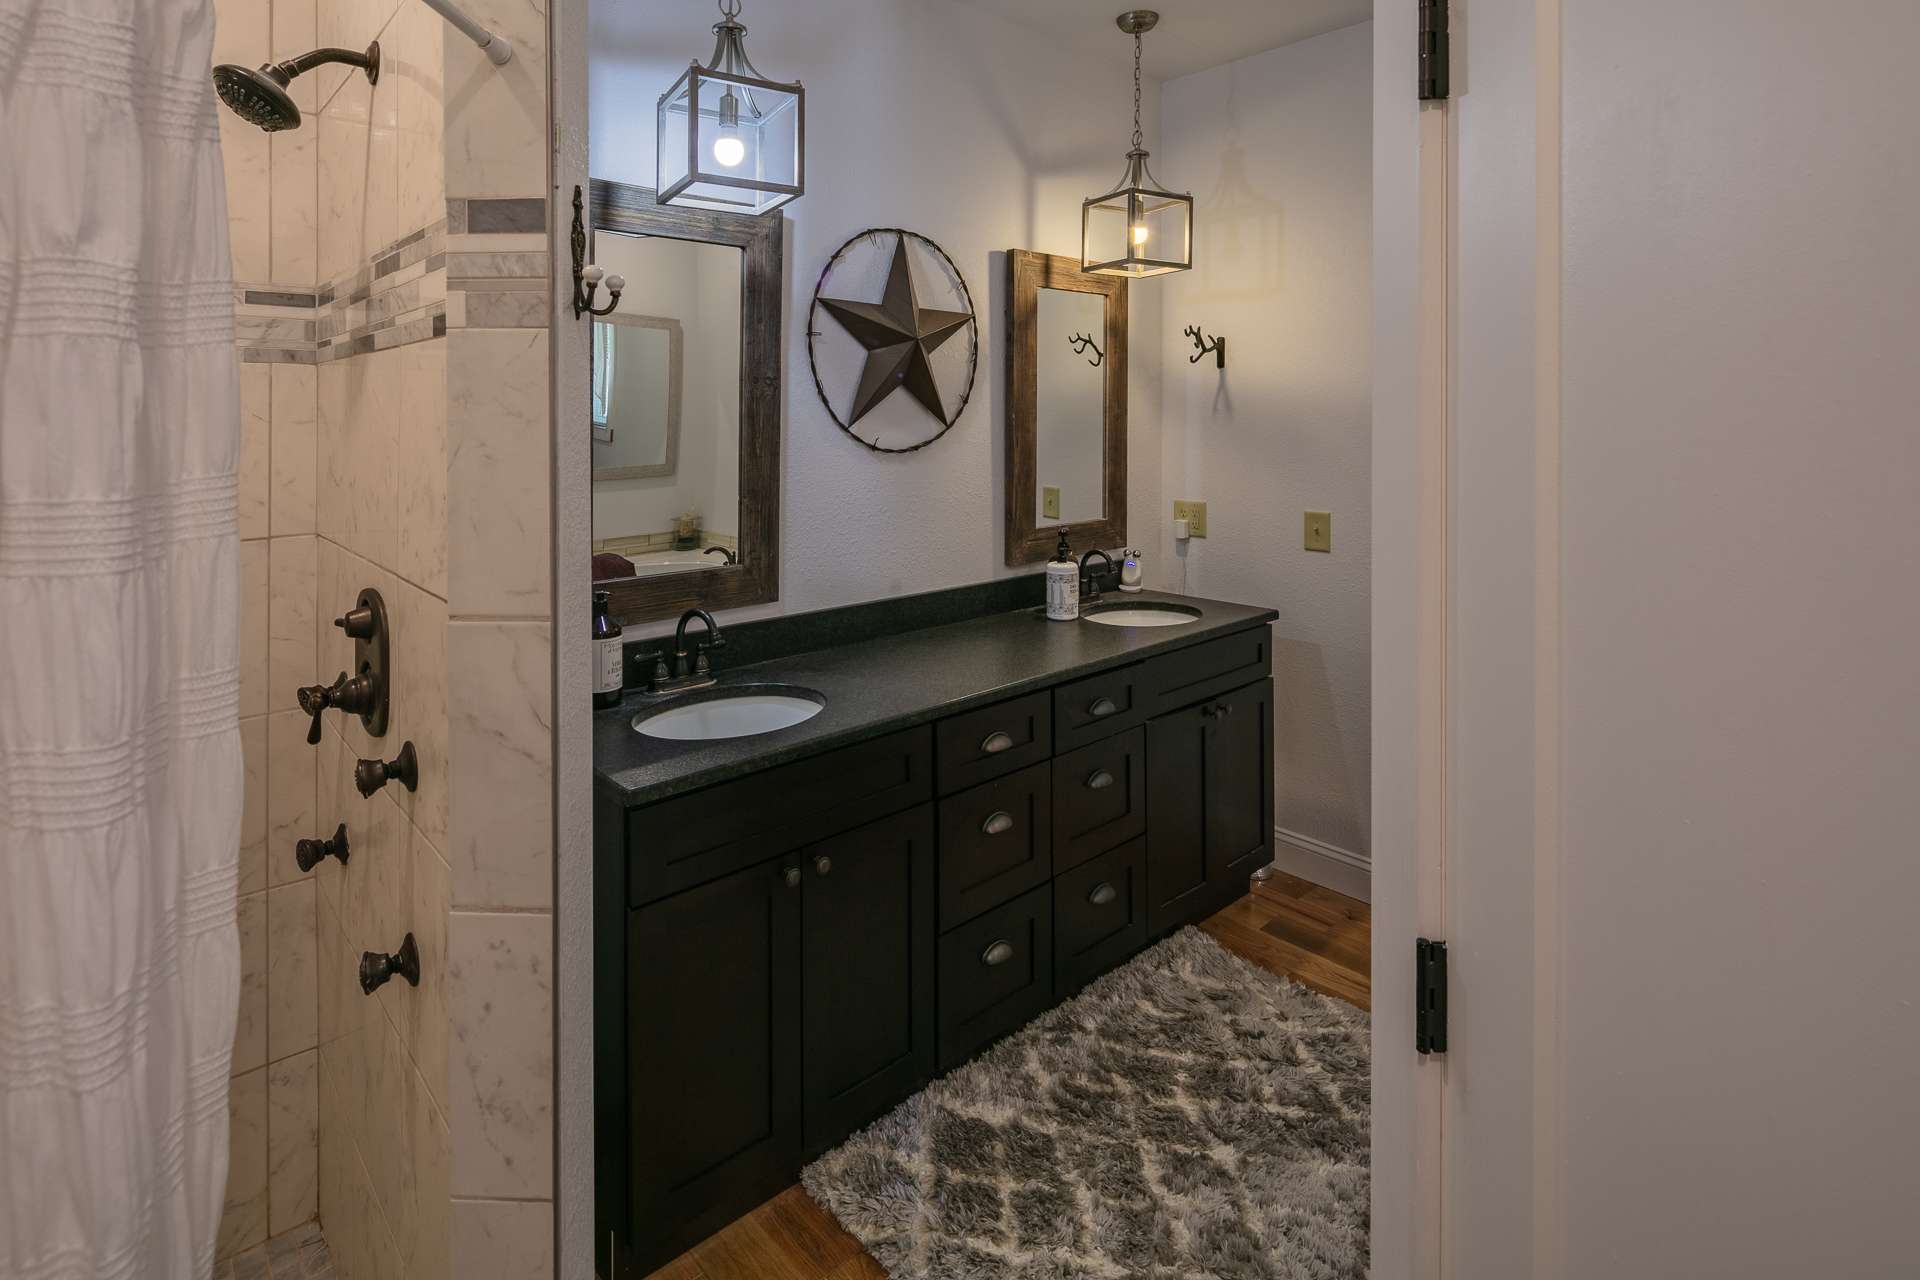 The master bath features a double vanity, leather granite countertop, whirlpool tub and tile shower.